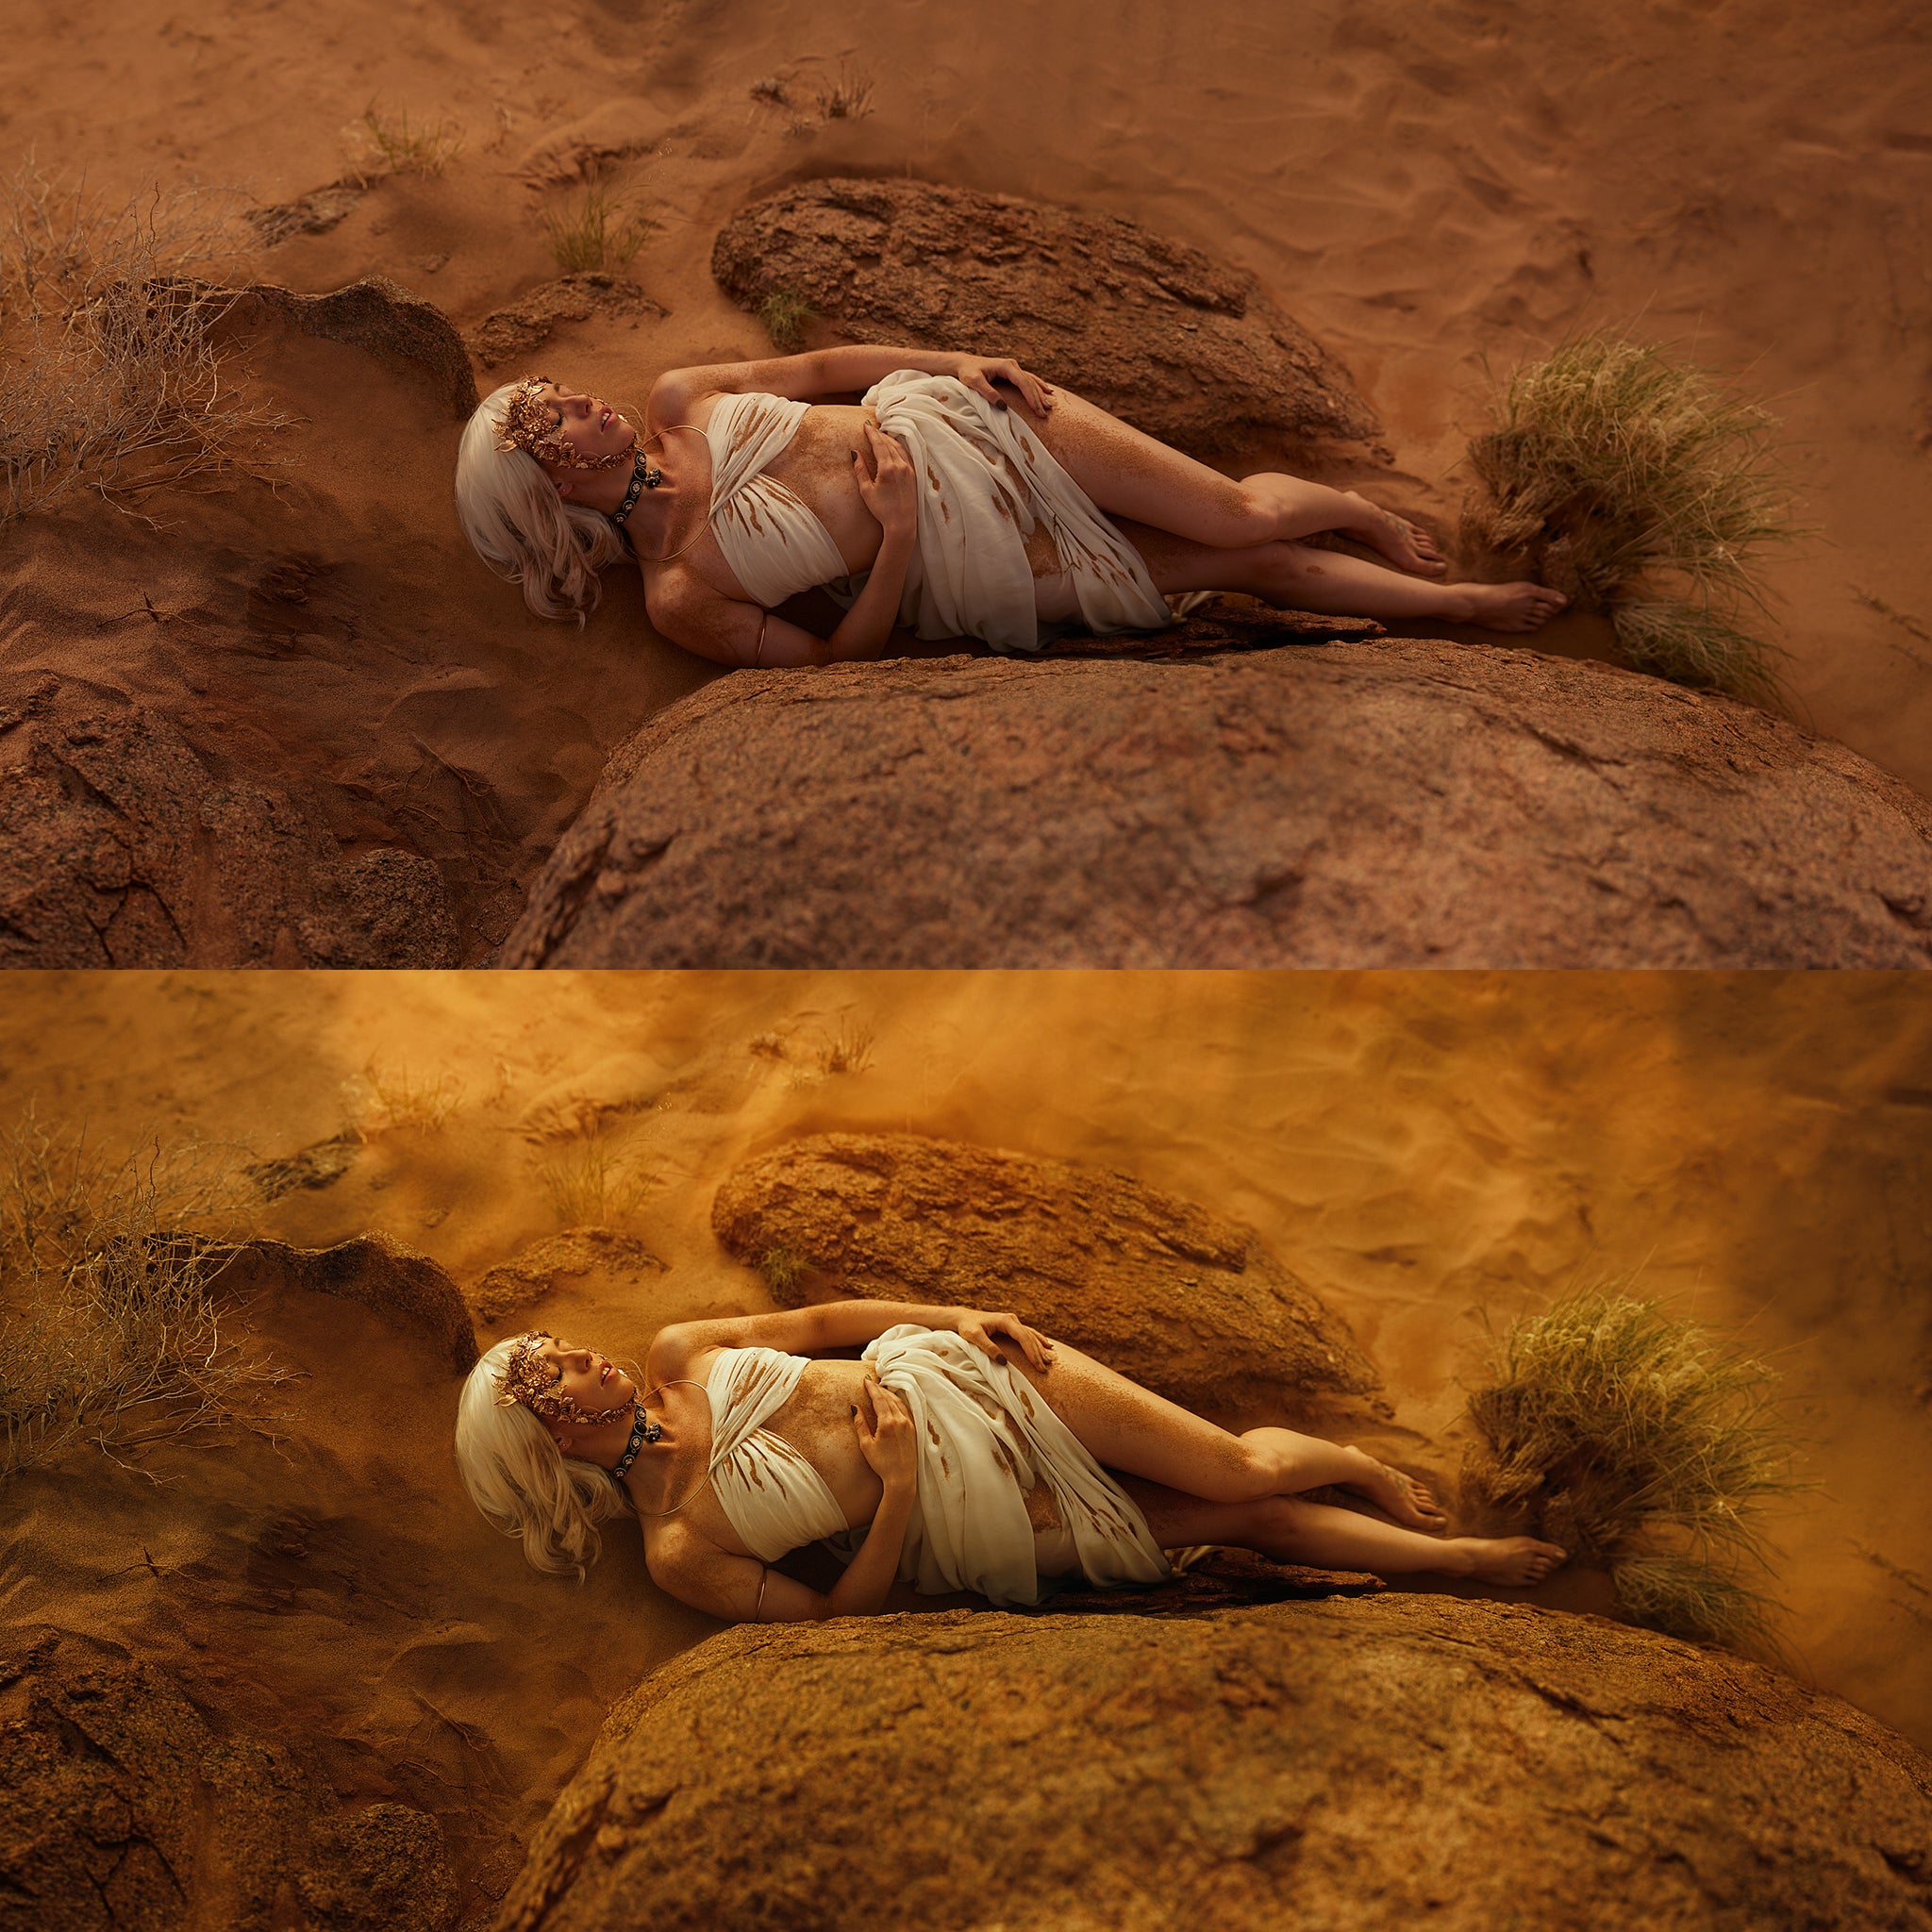 Bella Kotak photography of Brandi Nicole - Namibia, sands, dunes, birds eye view, orange, warm tones, before, after, only the curious